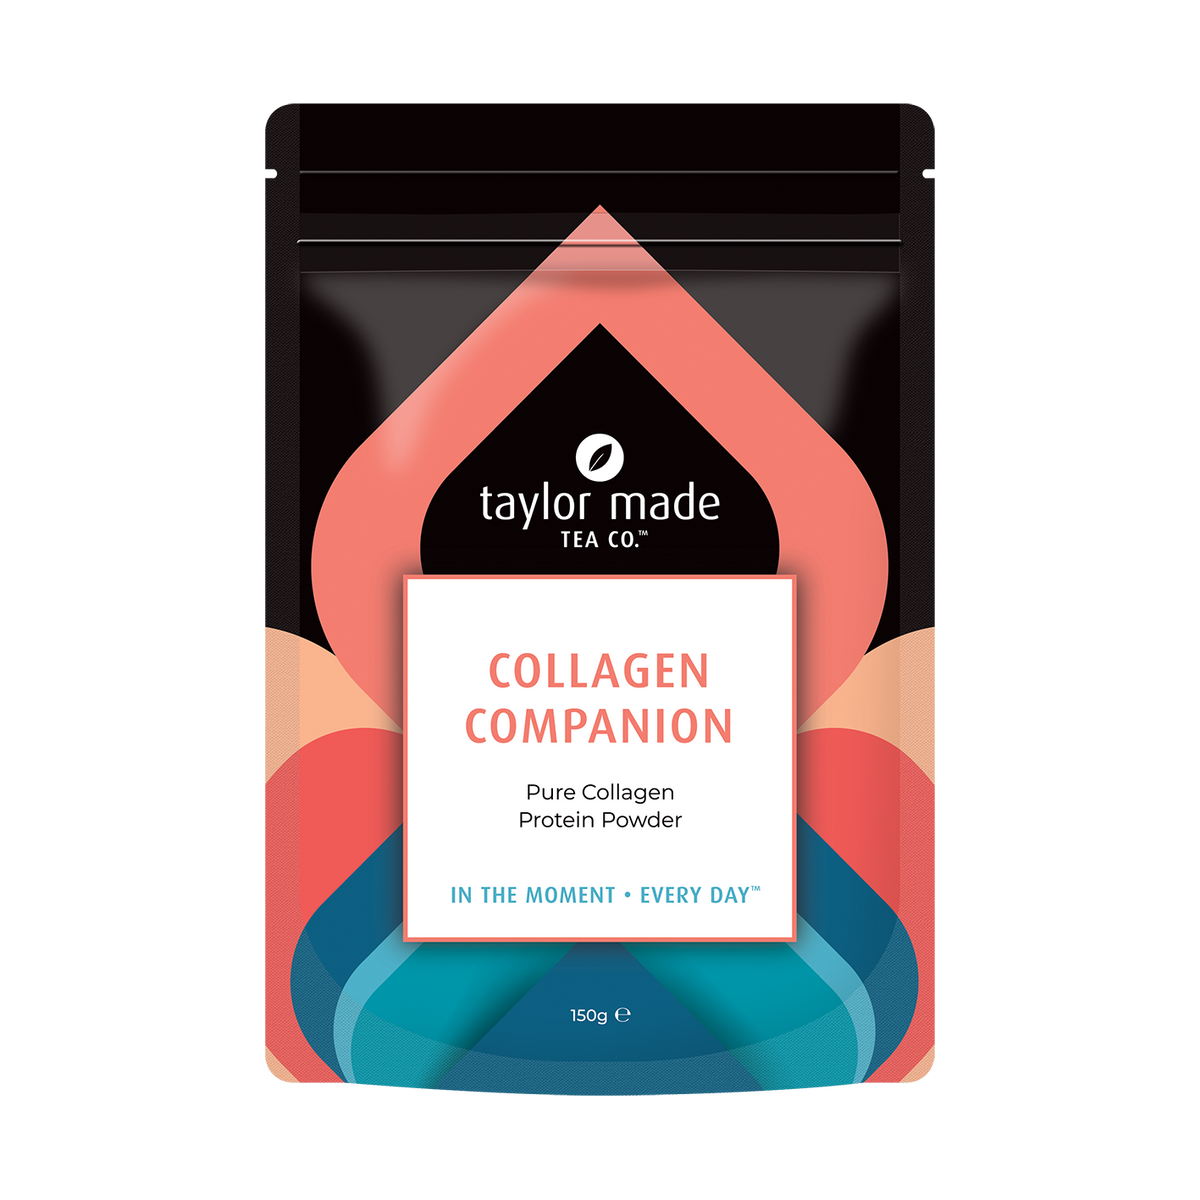 Taylor Made Tea Co. Collagen Companion Collagen Peptide Protein Powder pouch with coral and blue design.